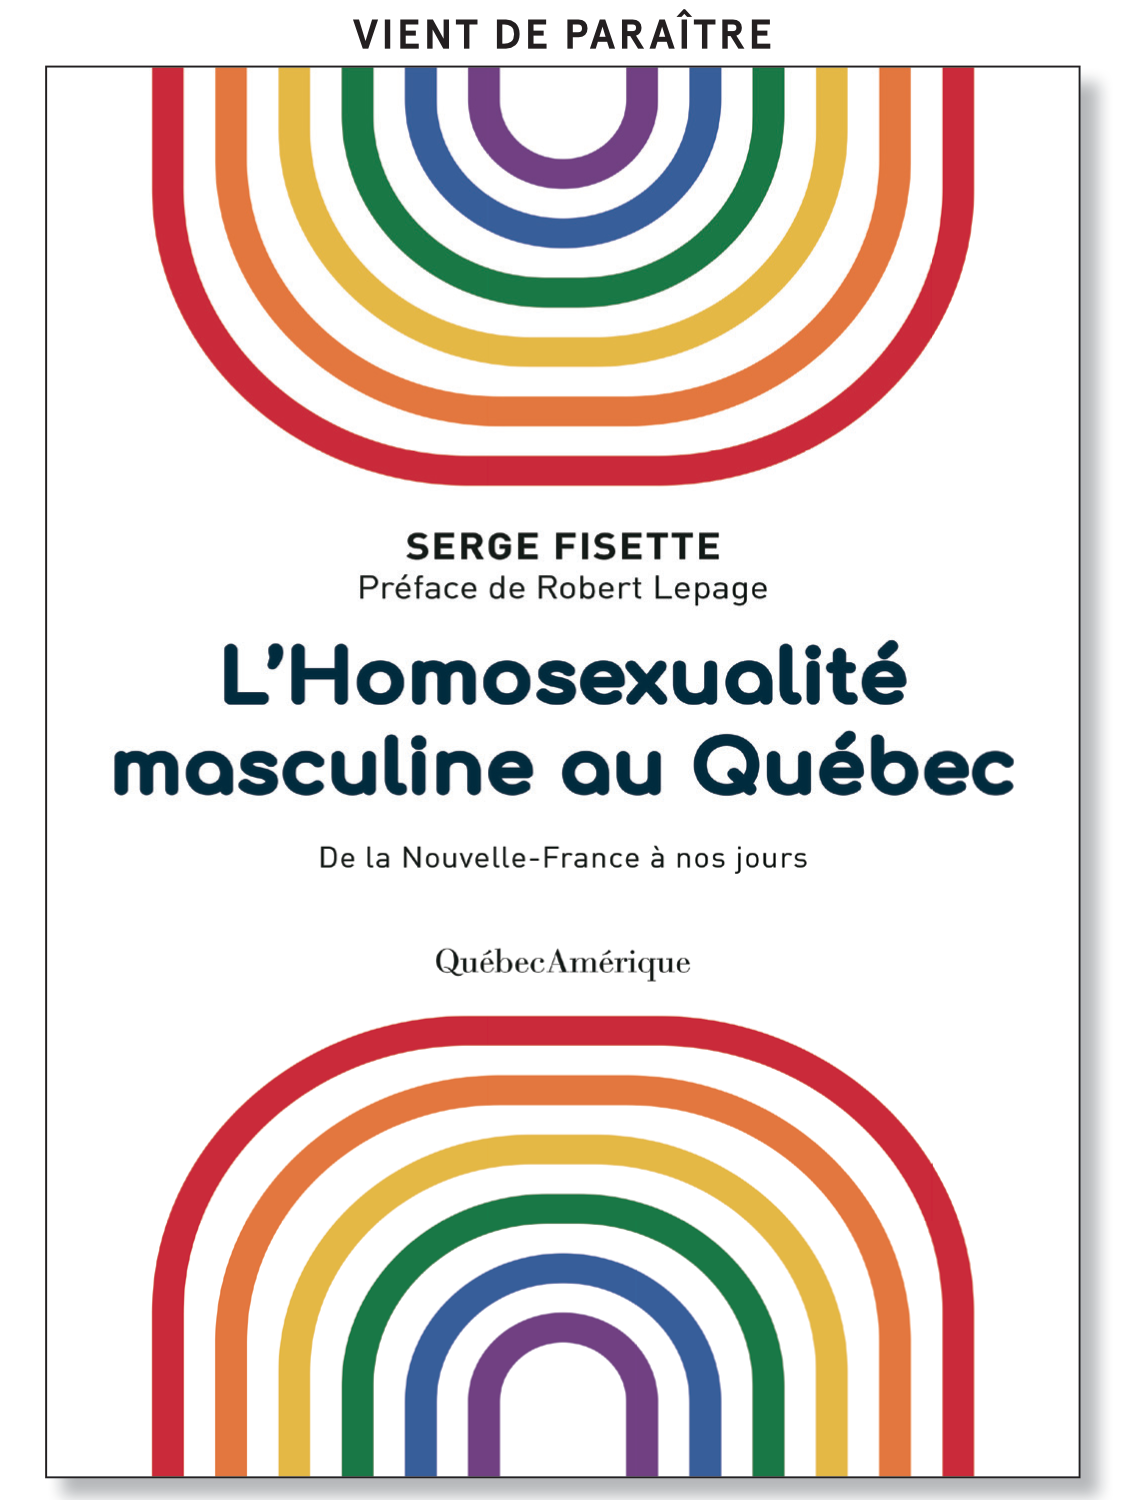 Annonce gay quebec